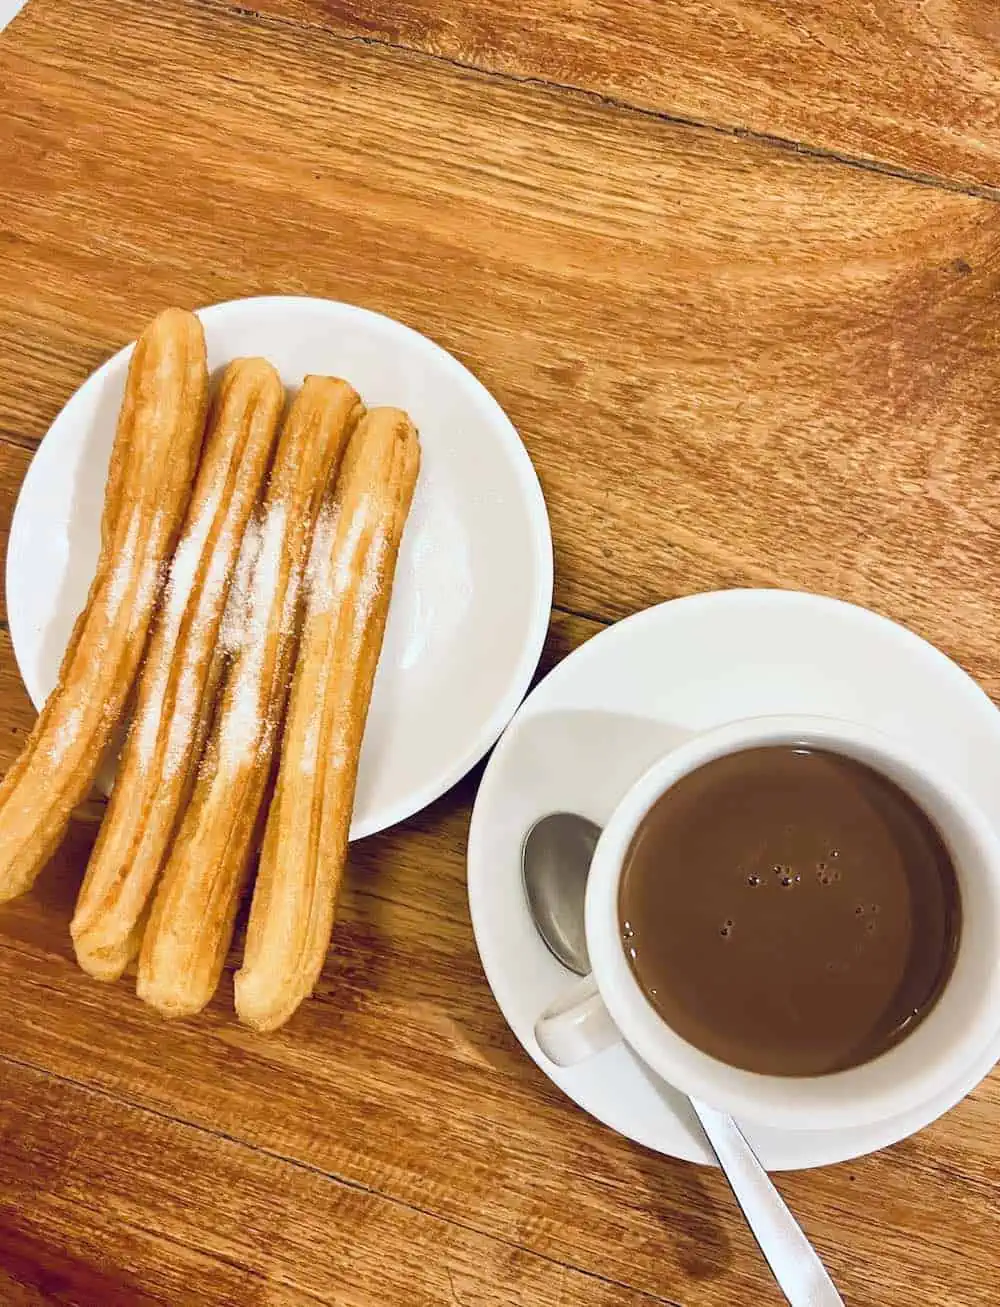 A mug of hot chocolate with four nd churros in Barcelona.